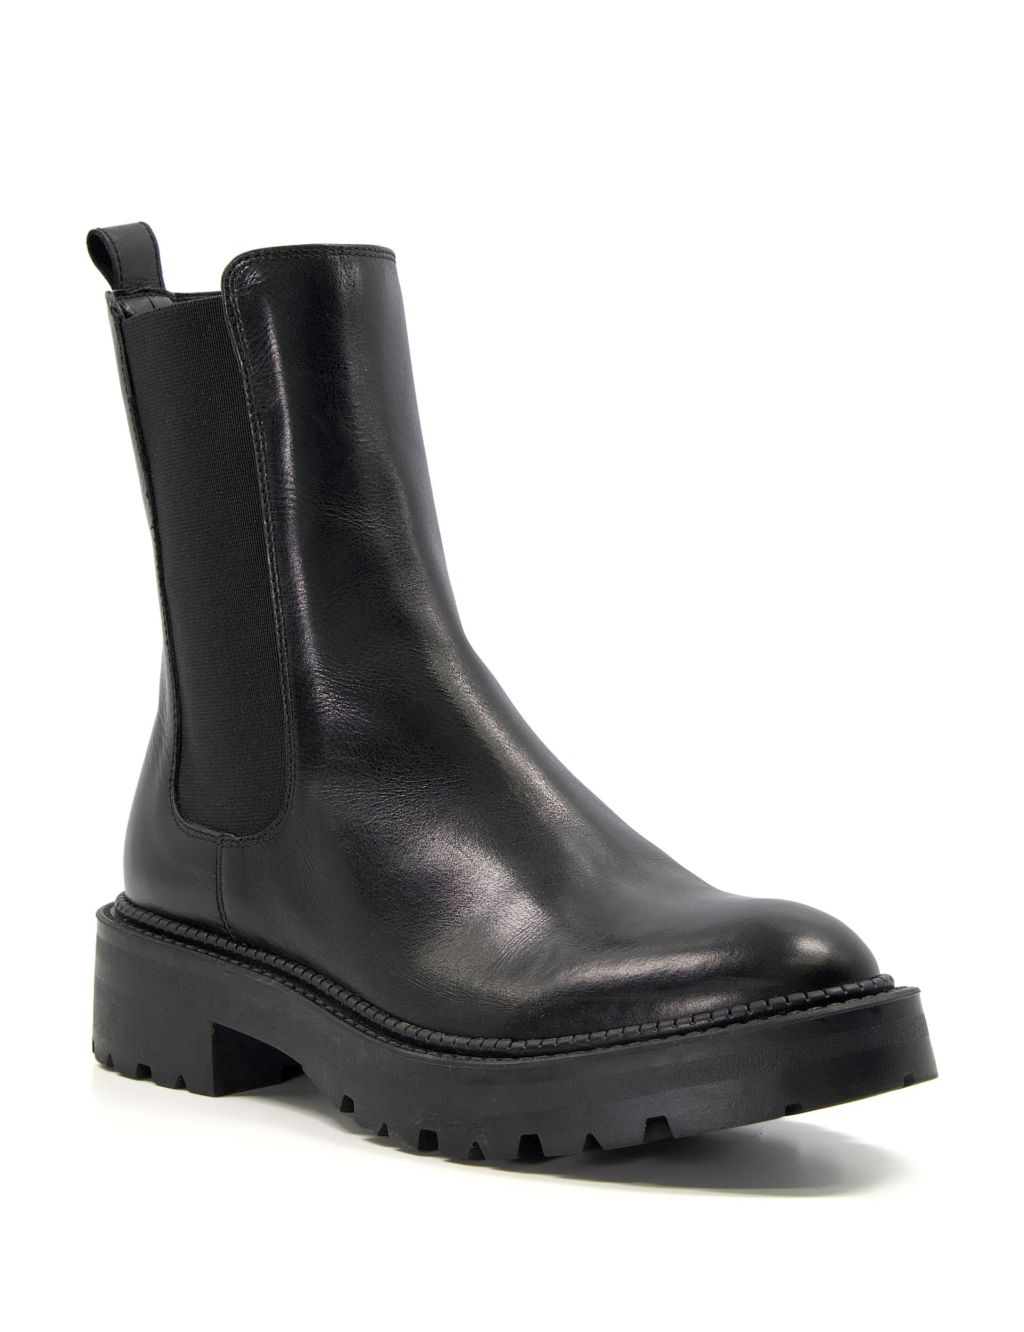 Leather Chunky Chelsea Ankle Boot image 1